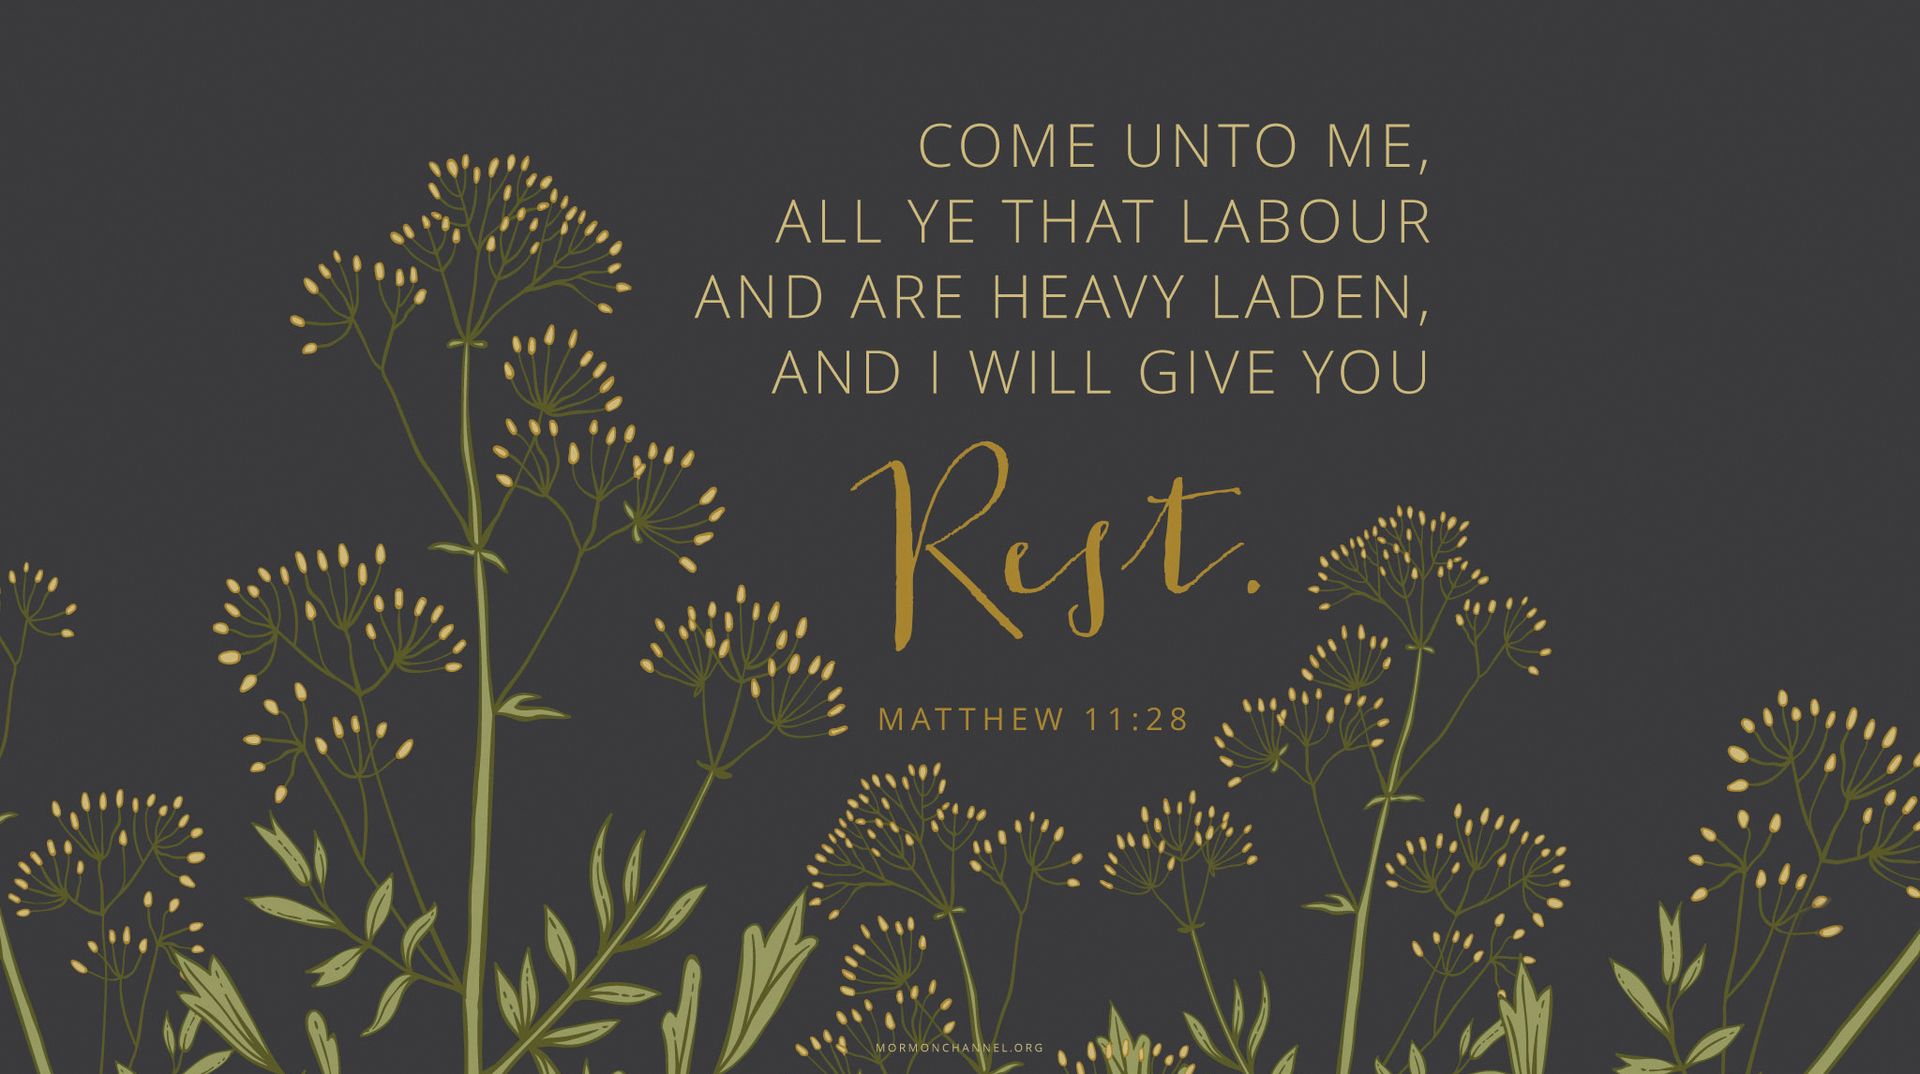 “Come unto me, all ye that labour and are heavy laden, and I will give you rest.”—Matthew 11:28